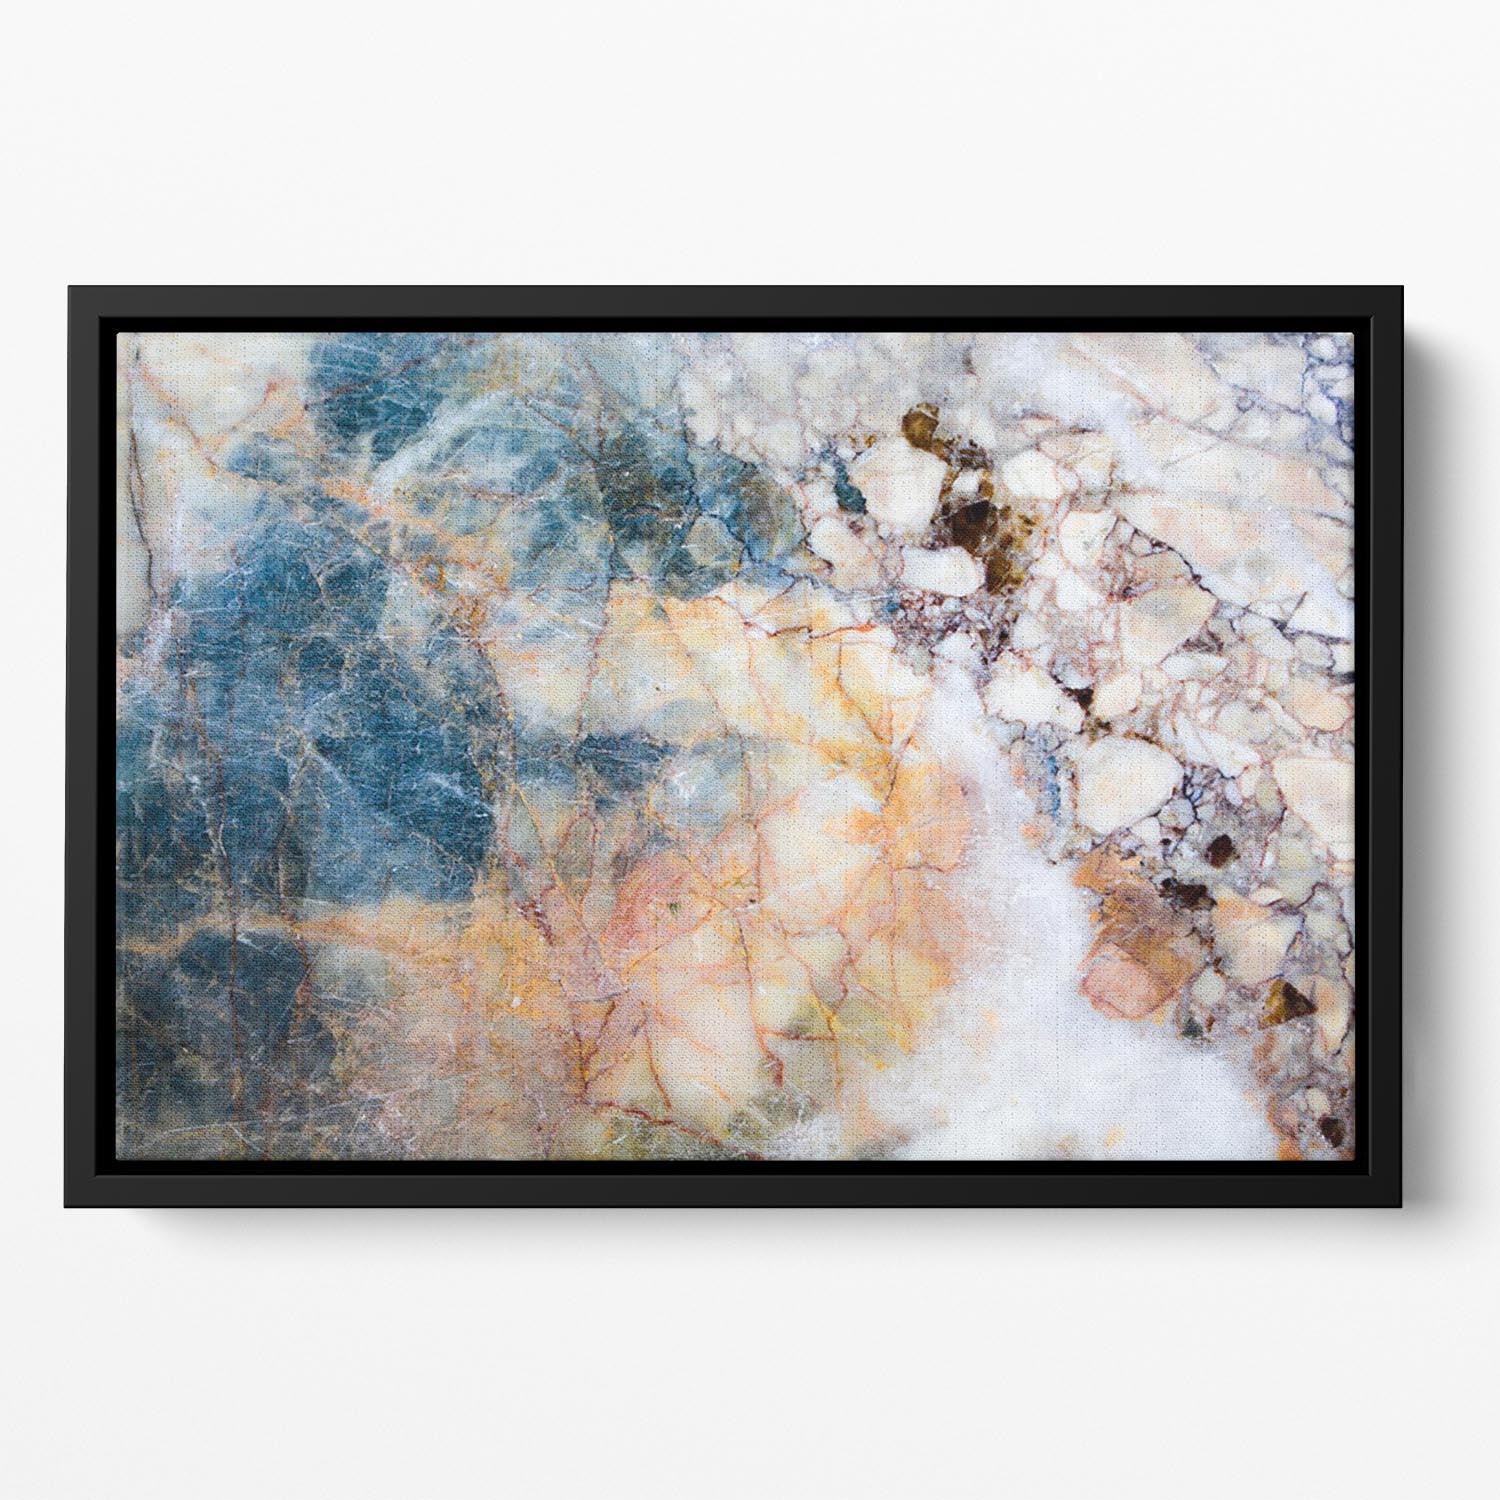 Marble patterned texture Floating Framed Canvas - Canvas Art Rocks - 2